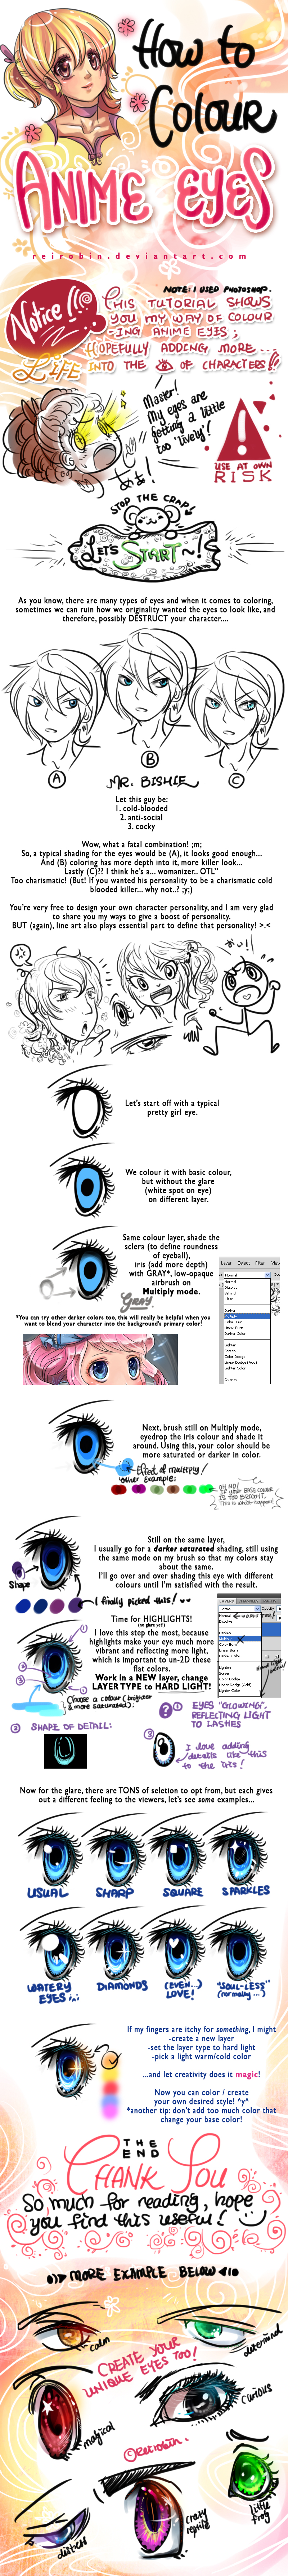 How to color Anime Eyes